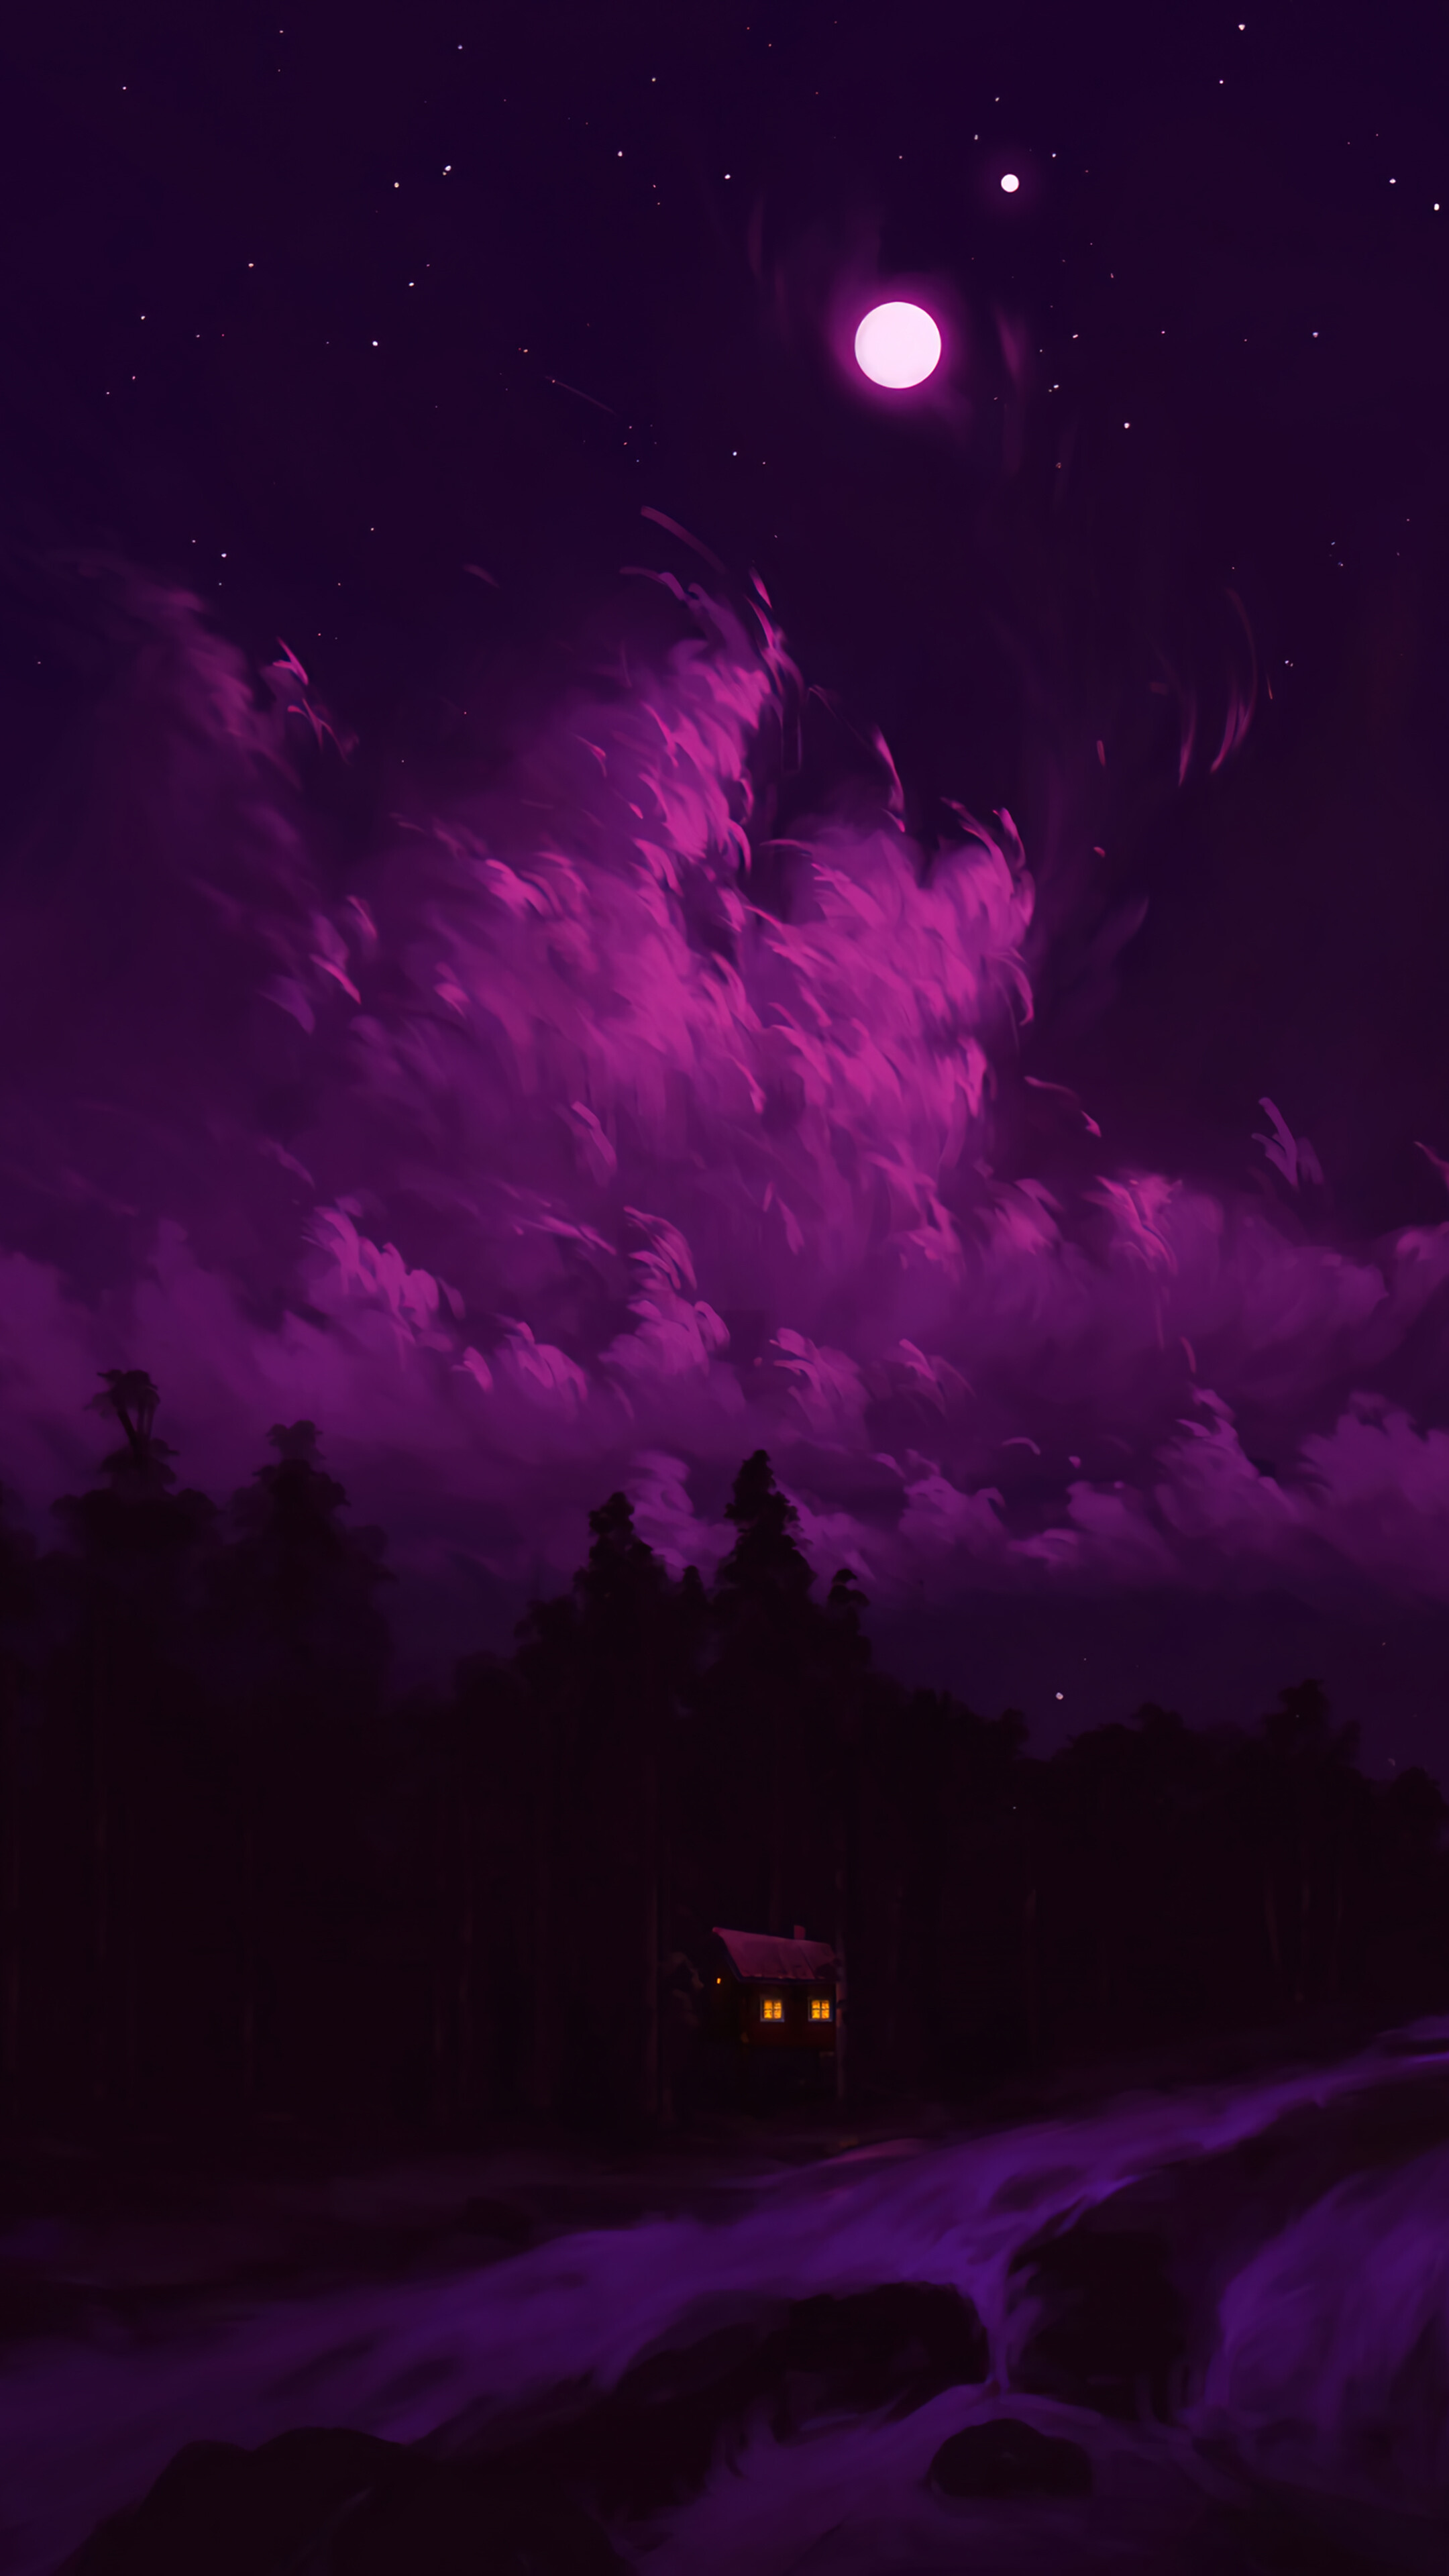 🔥 [21+] Night Sky with Clouds Wallpapers | WallpaperSafari